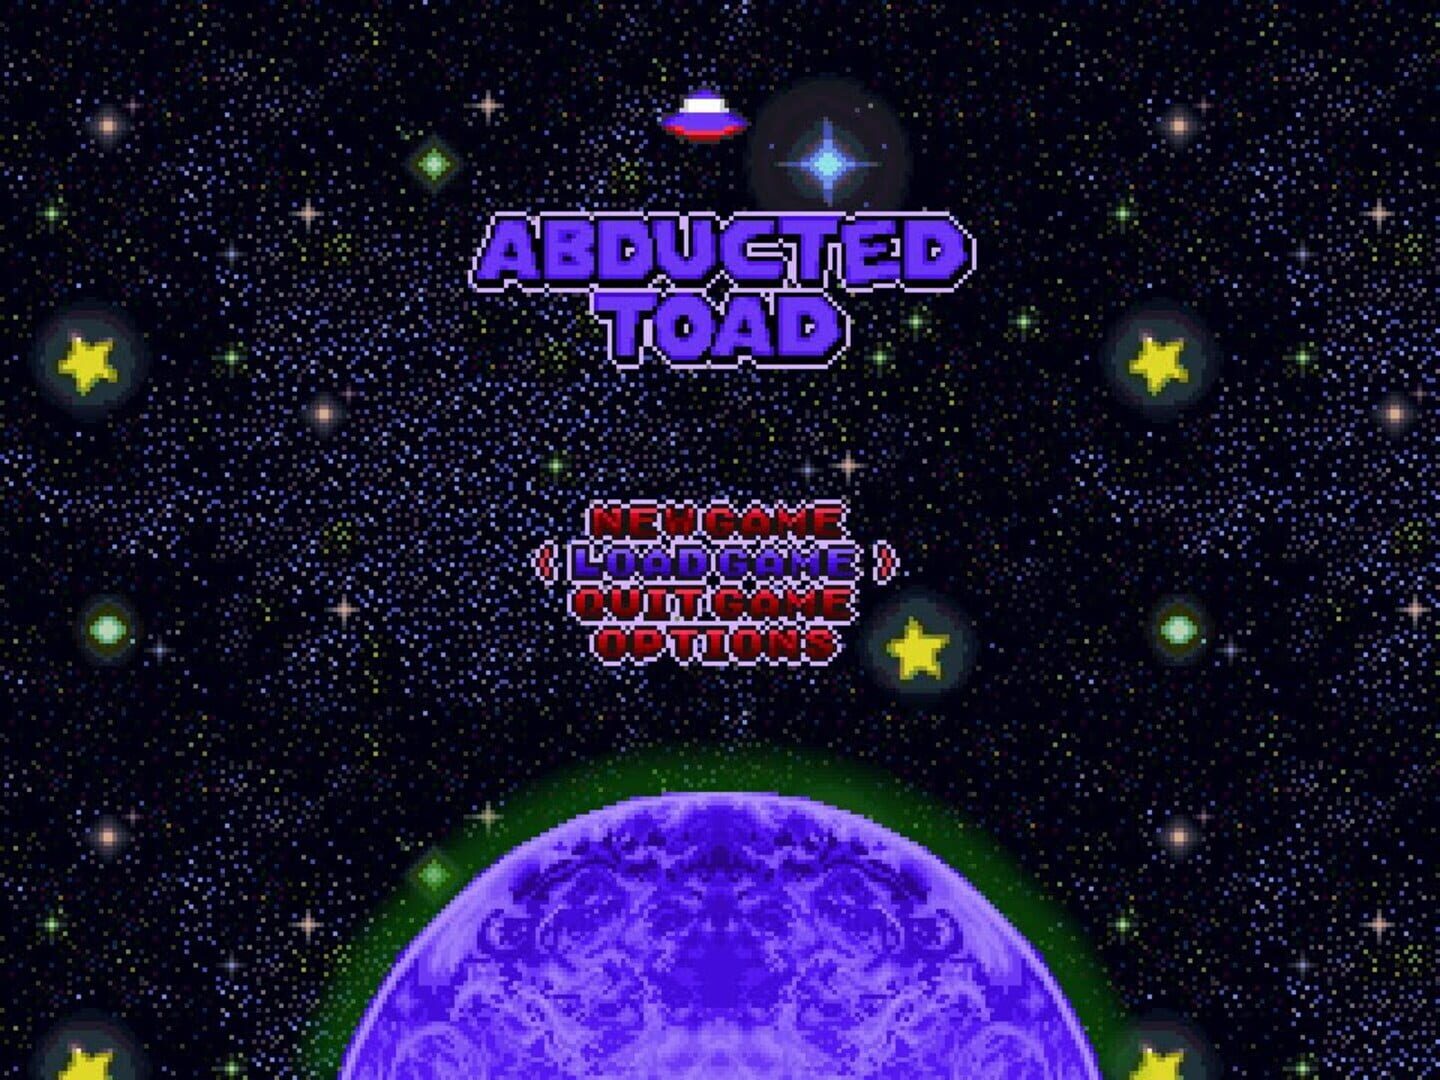 Abducted Toad